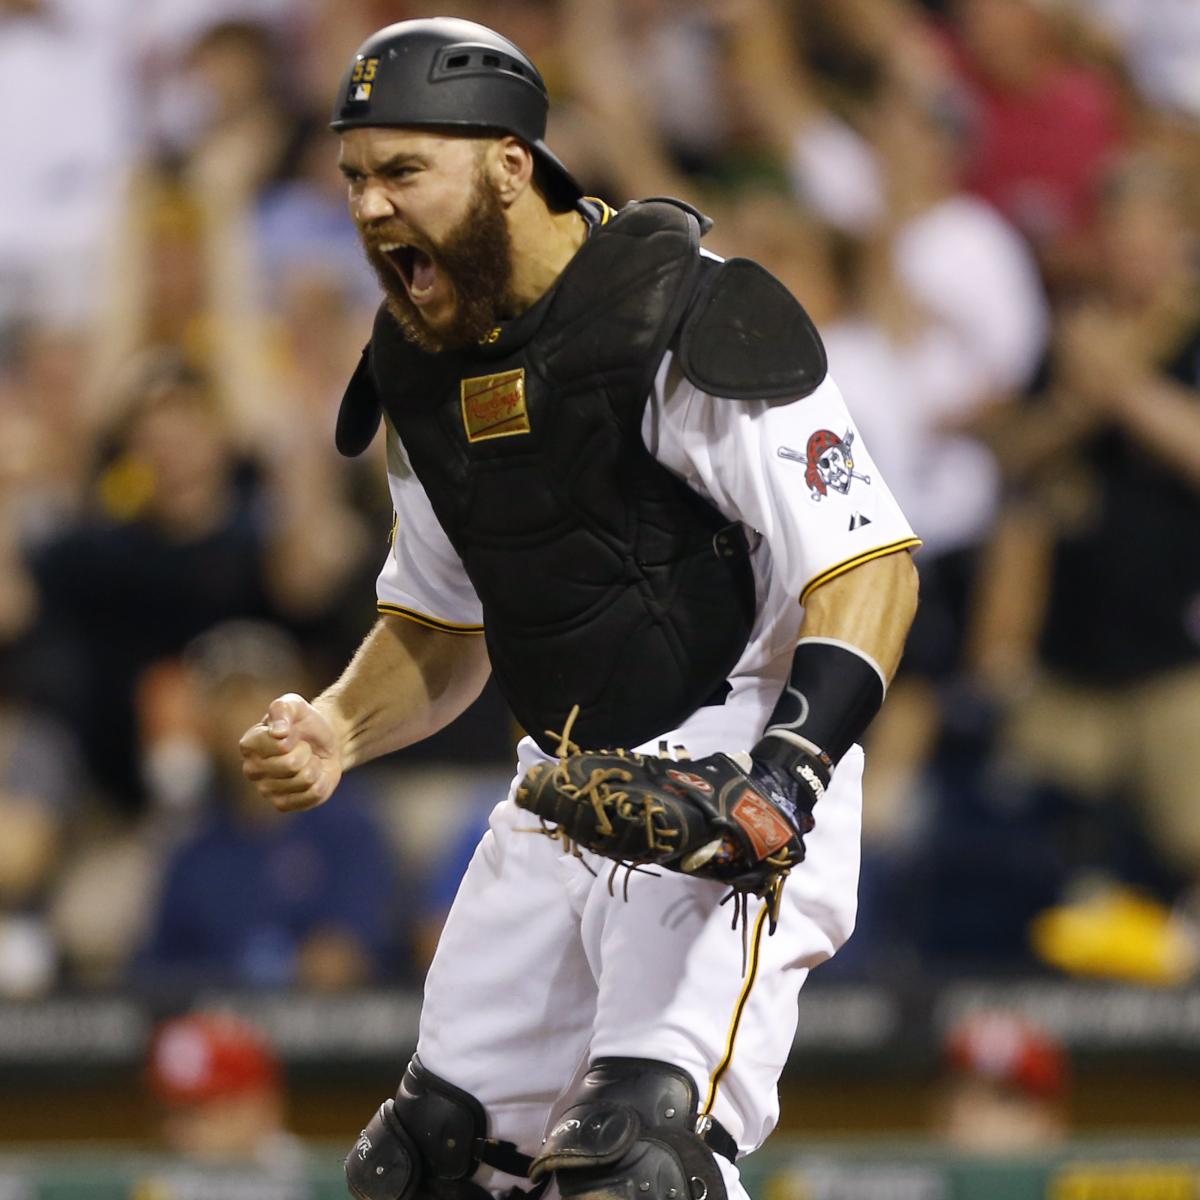 Pirates to extend qualifying offer to Russell Martin - MLB Daily Dish